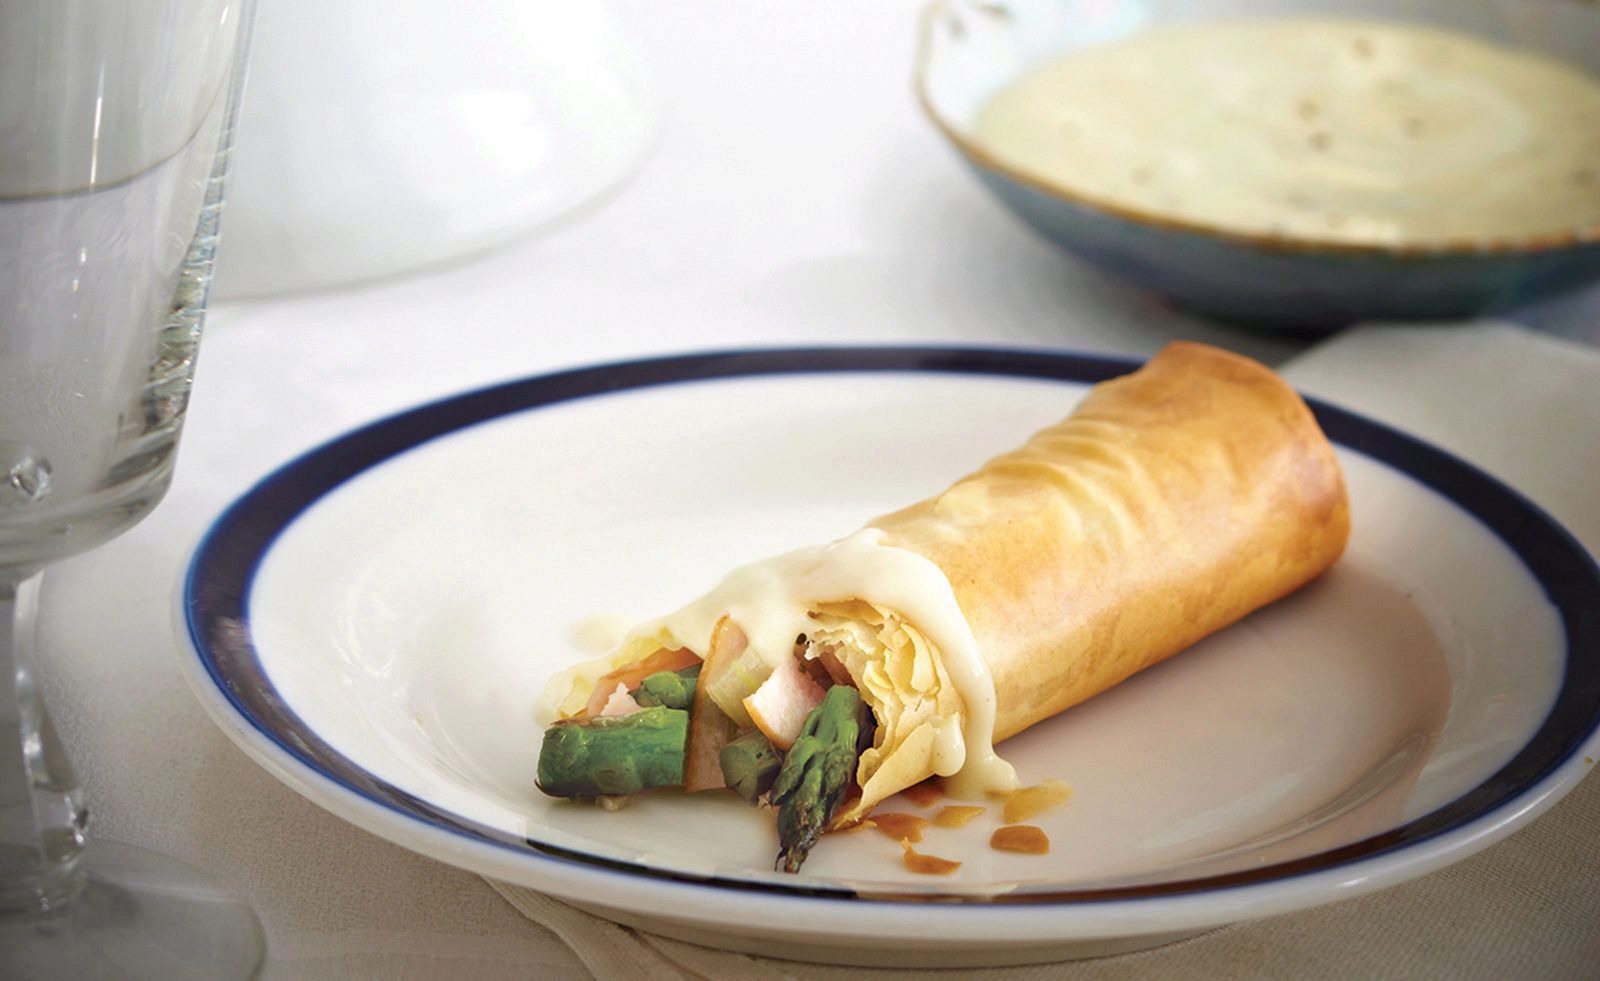 Read more about Asparagus & Ham Phyllo Rolls with Blue Cheese Sauce